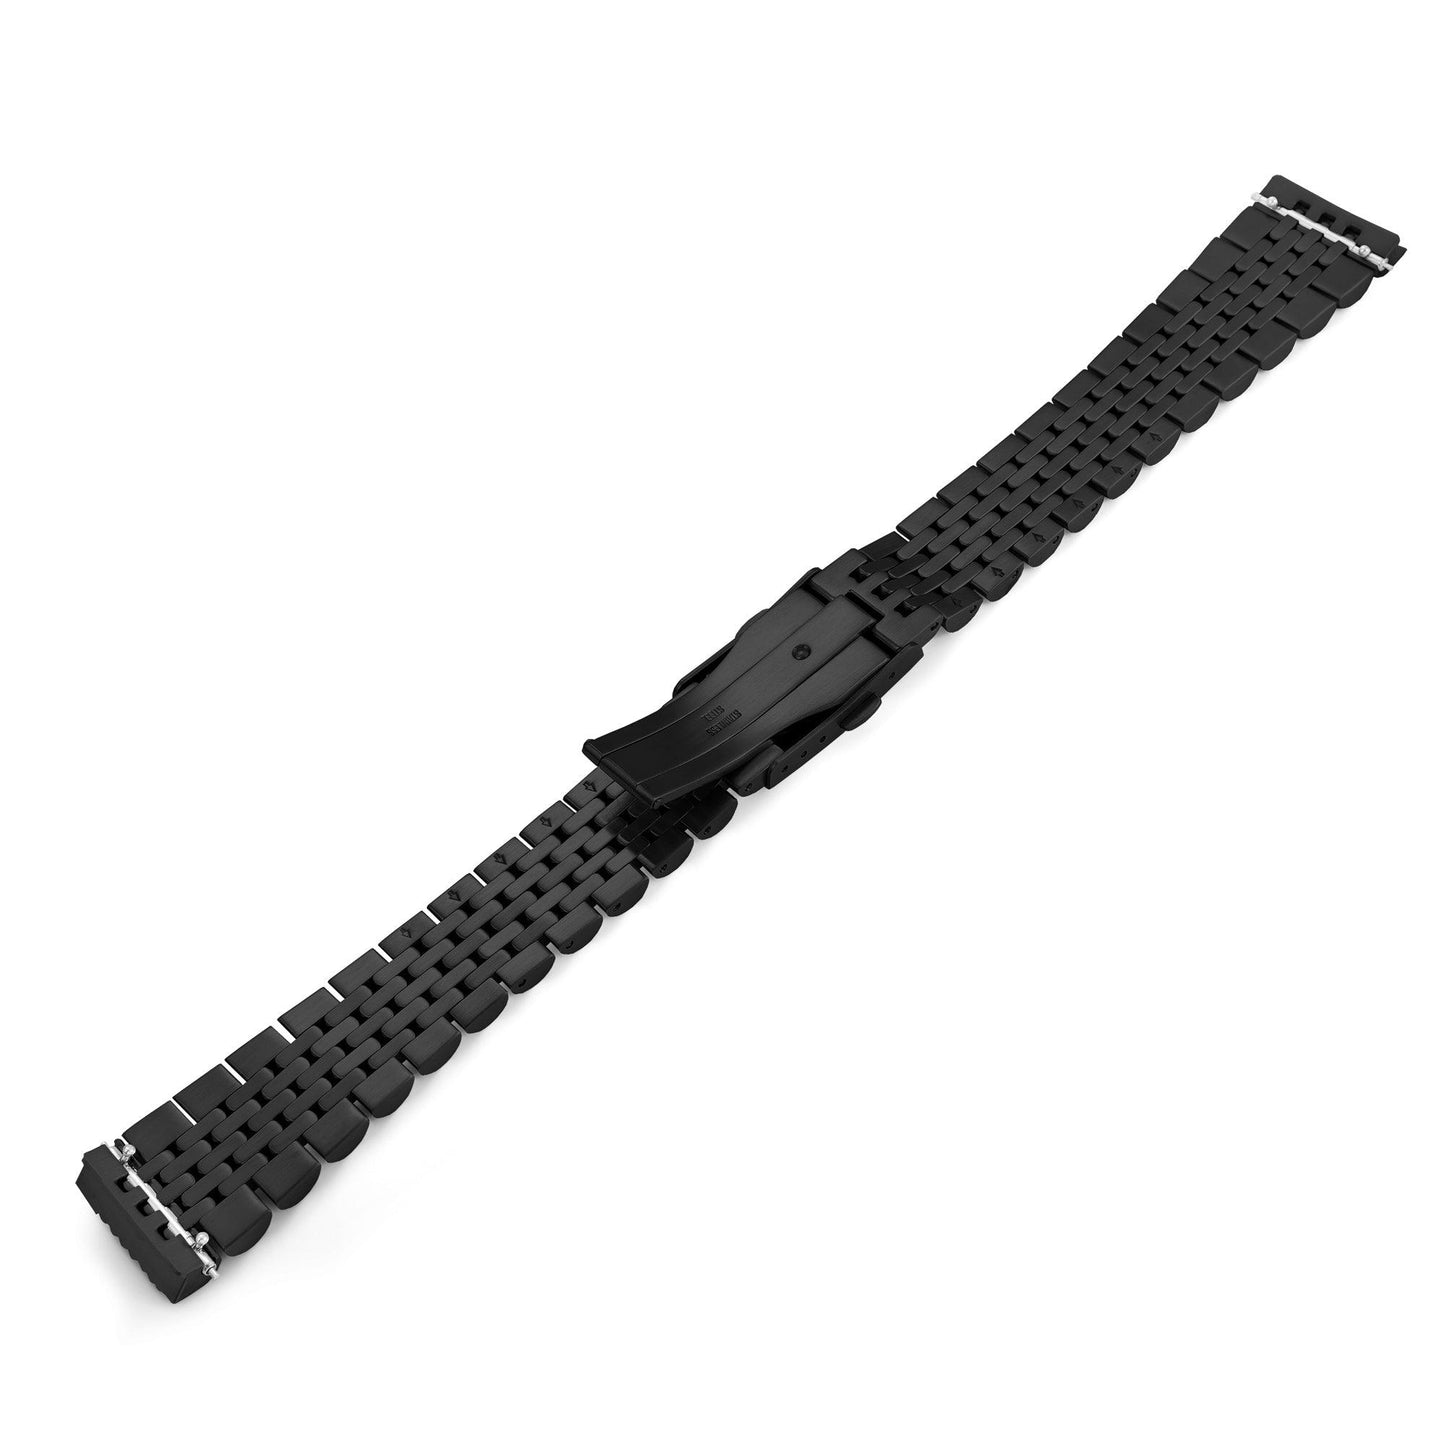 Skindiver Professional Bracelet Tool-Watch – Yellow & Black PVD - Wolbrook Watches